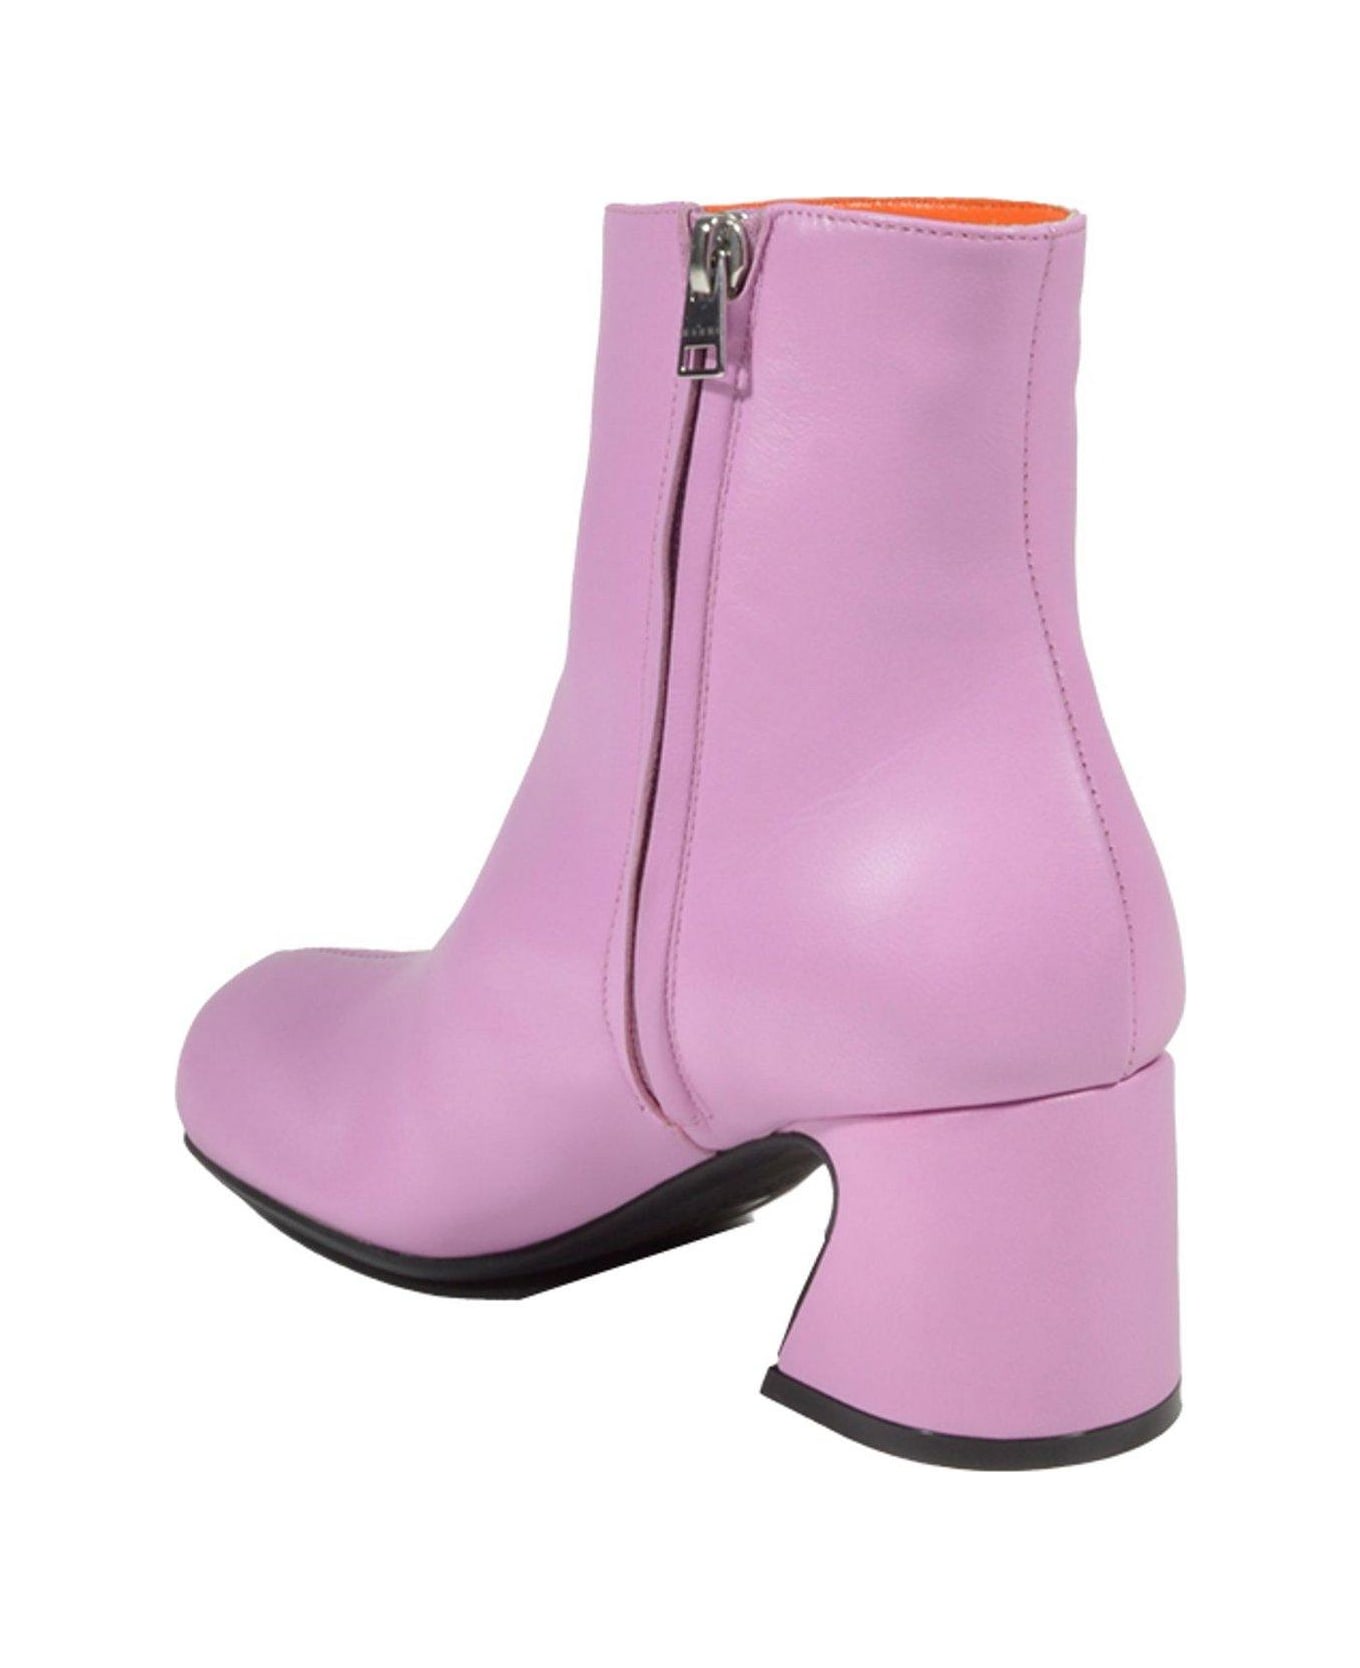 Marni Round Toe Zip-up Ankle Boots - PINK